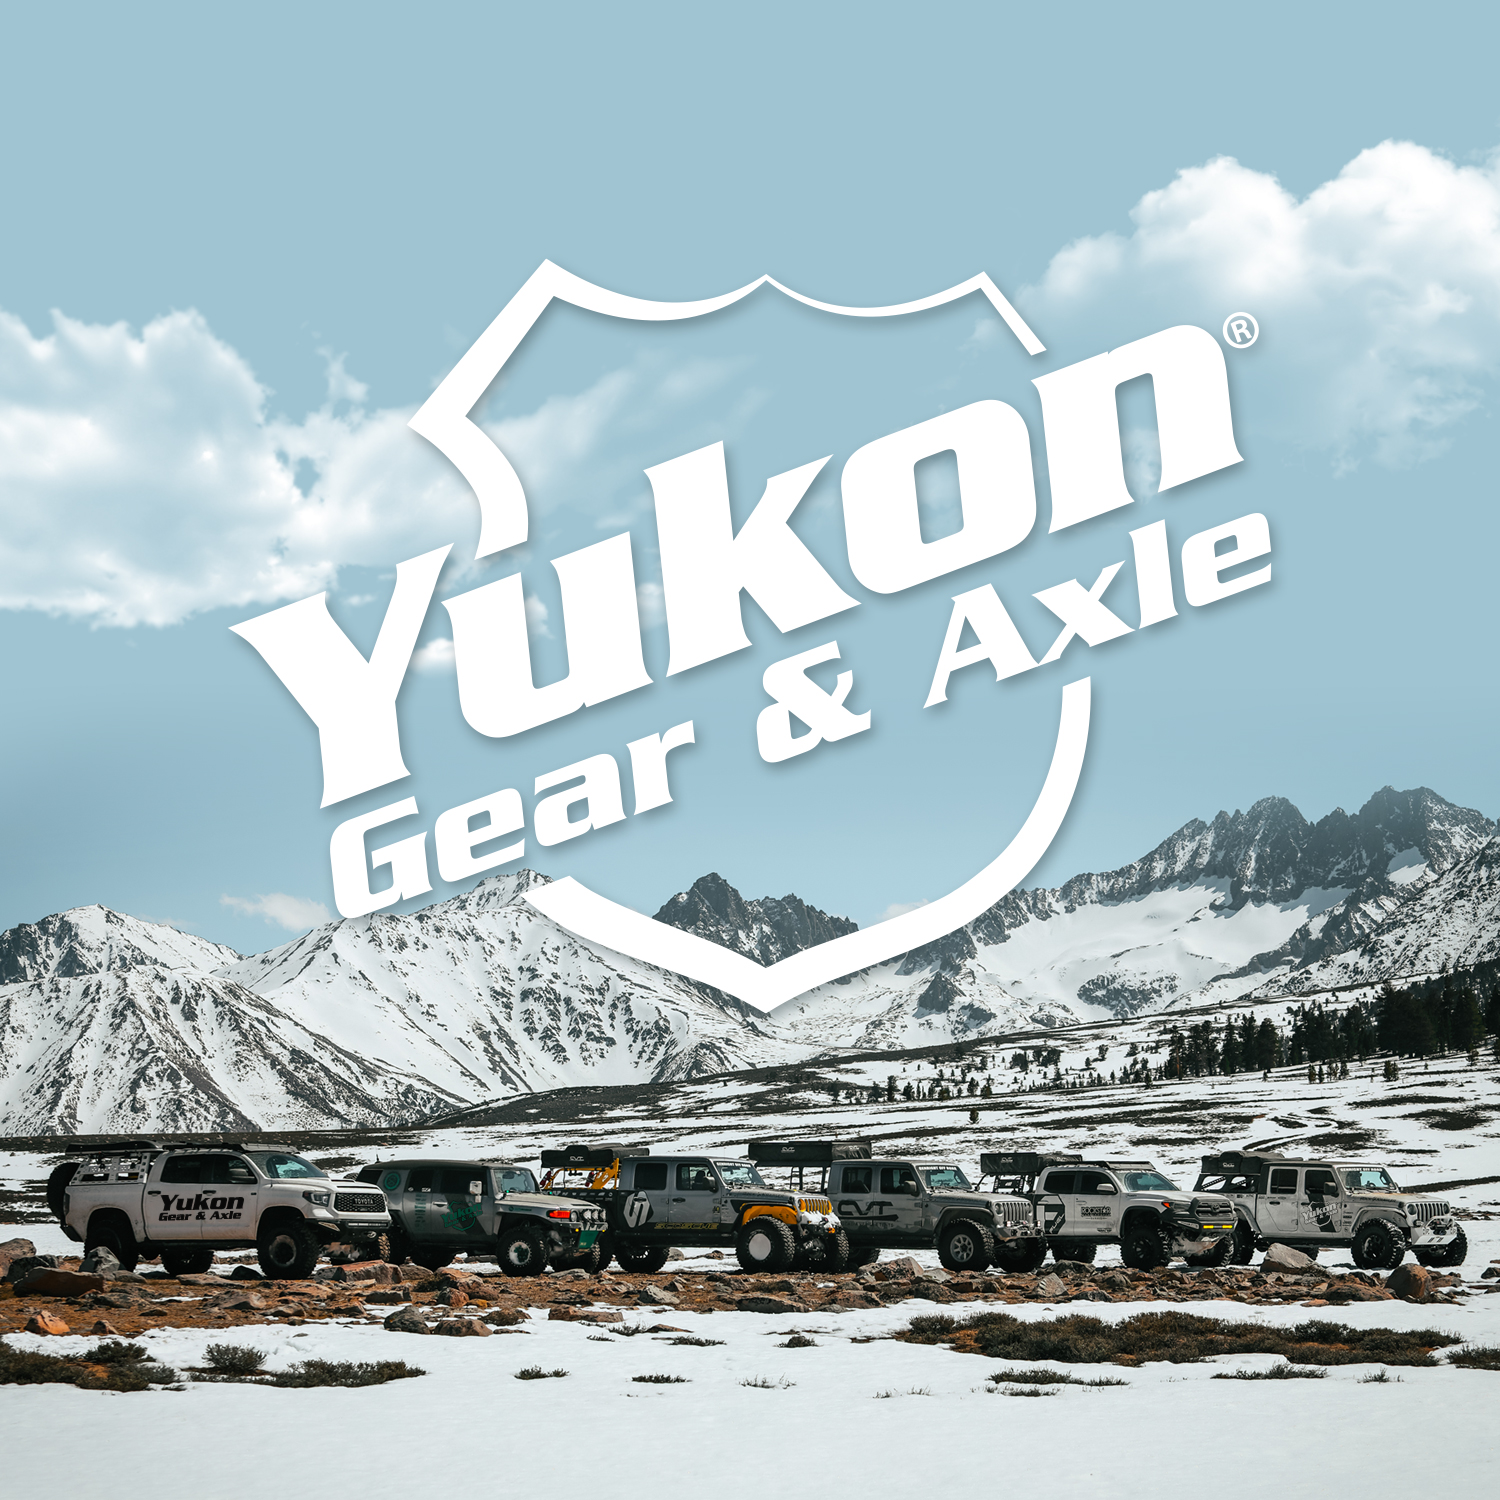 Yukon Pinion Setup Bearing for Ford 10.25” Differentials